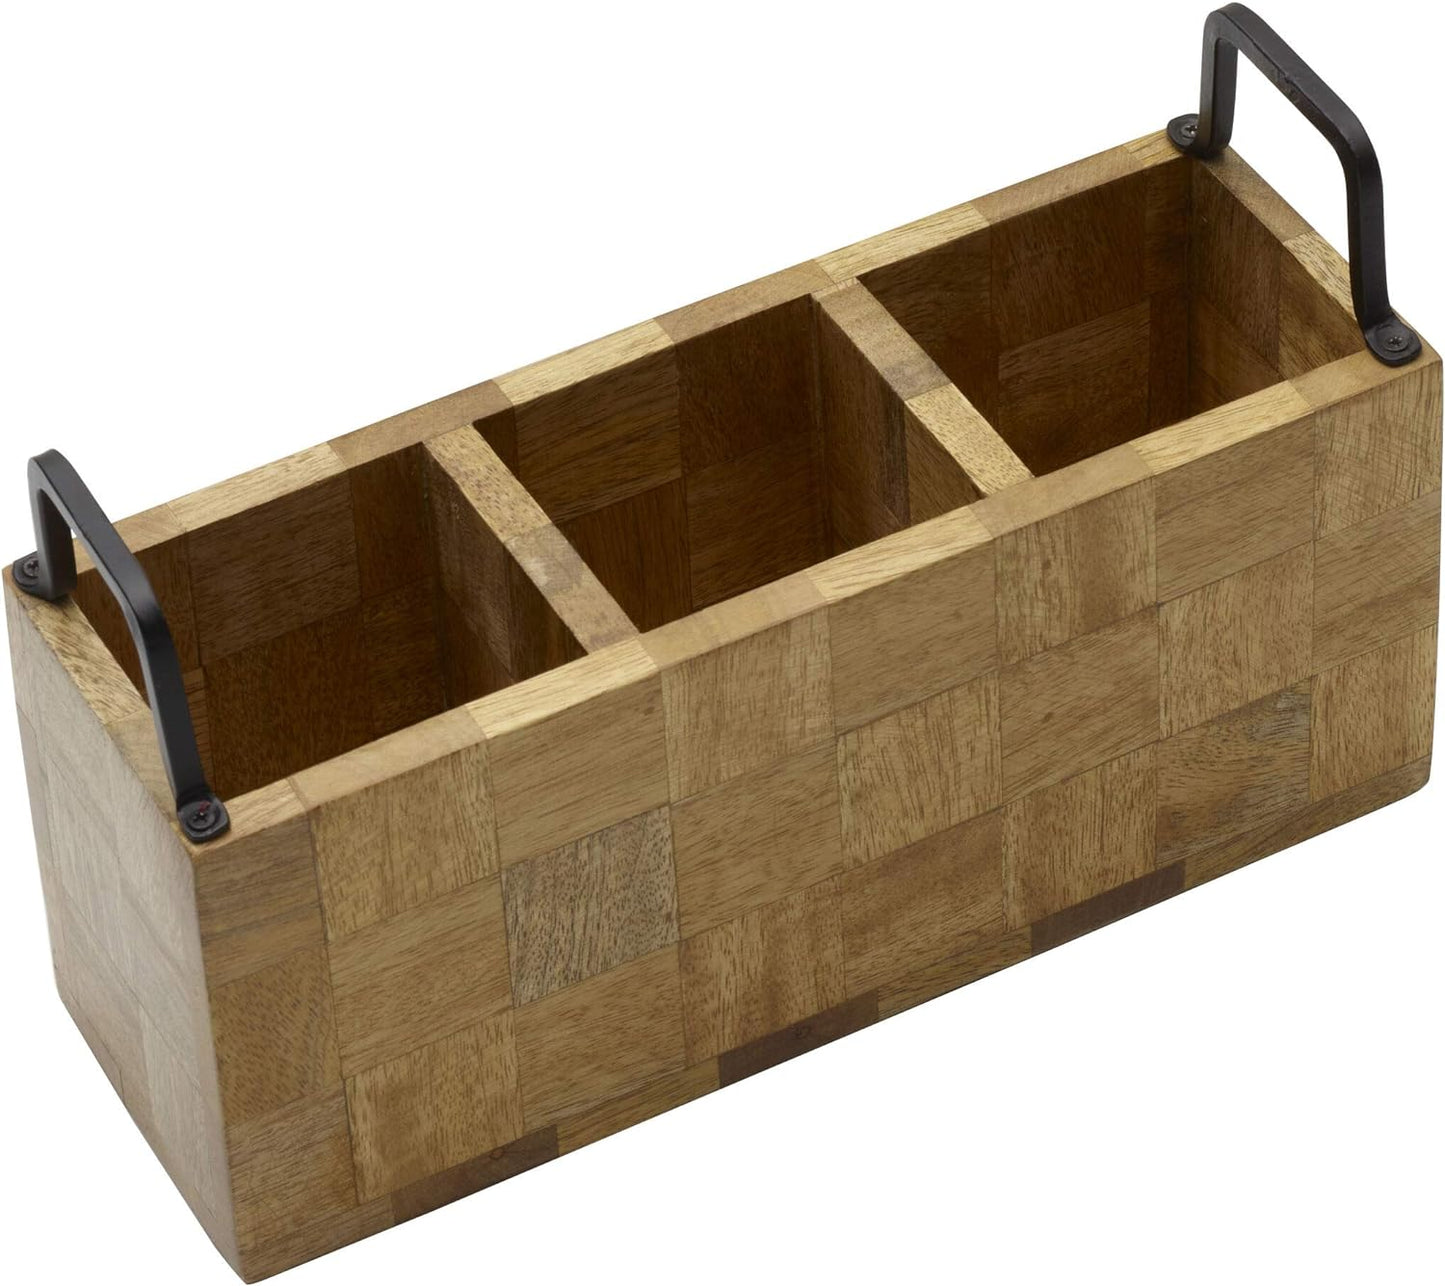 wooden 3 section caddy with metal handles.